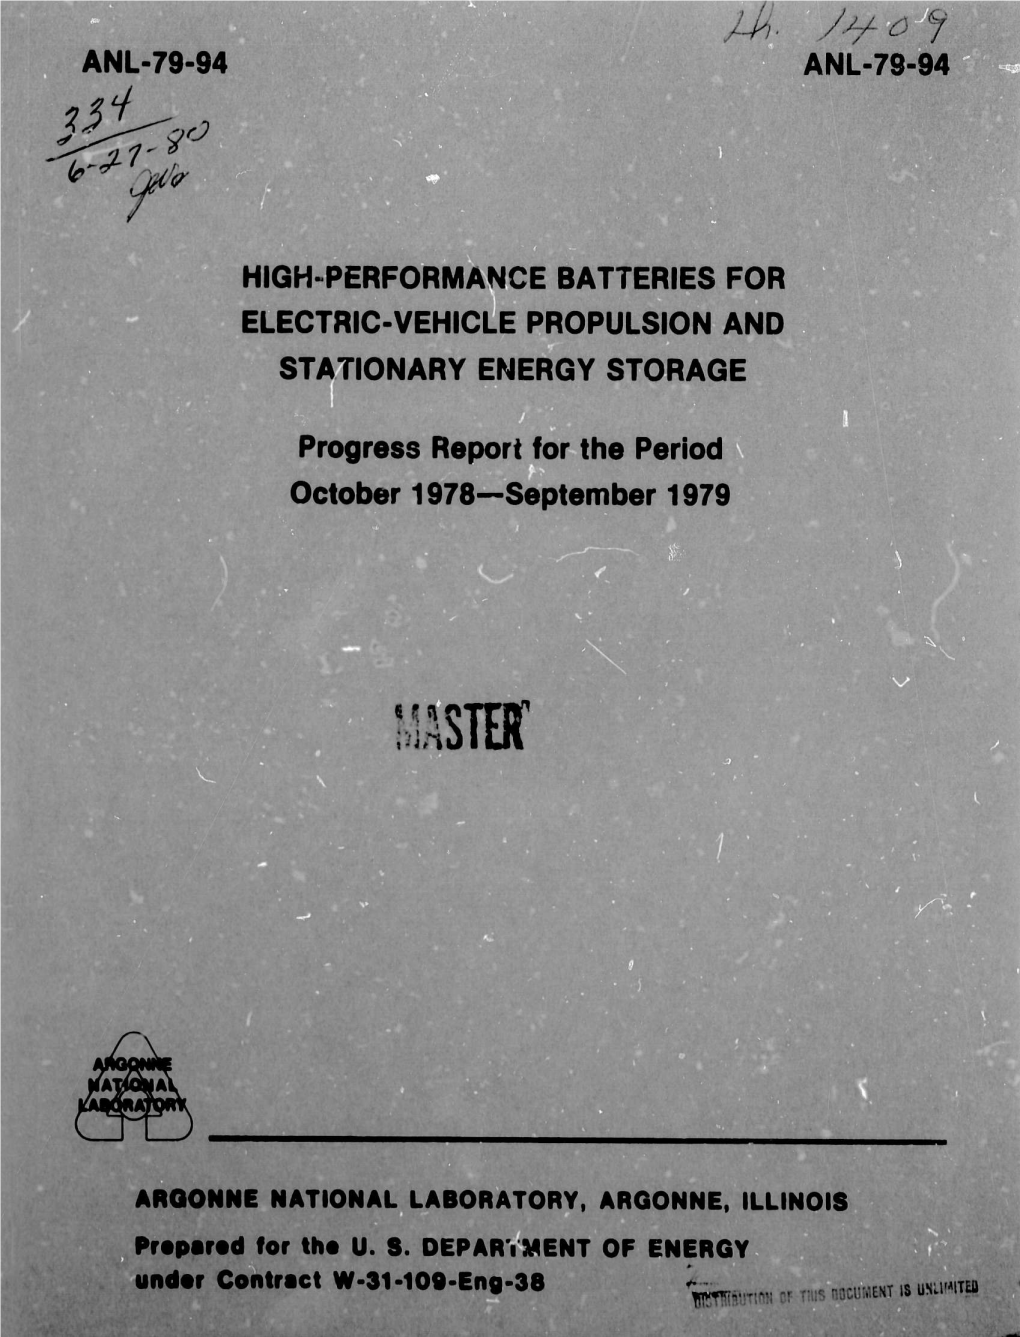 Anl-79-94 High-Performance Batteries for Stationary